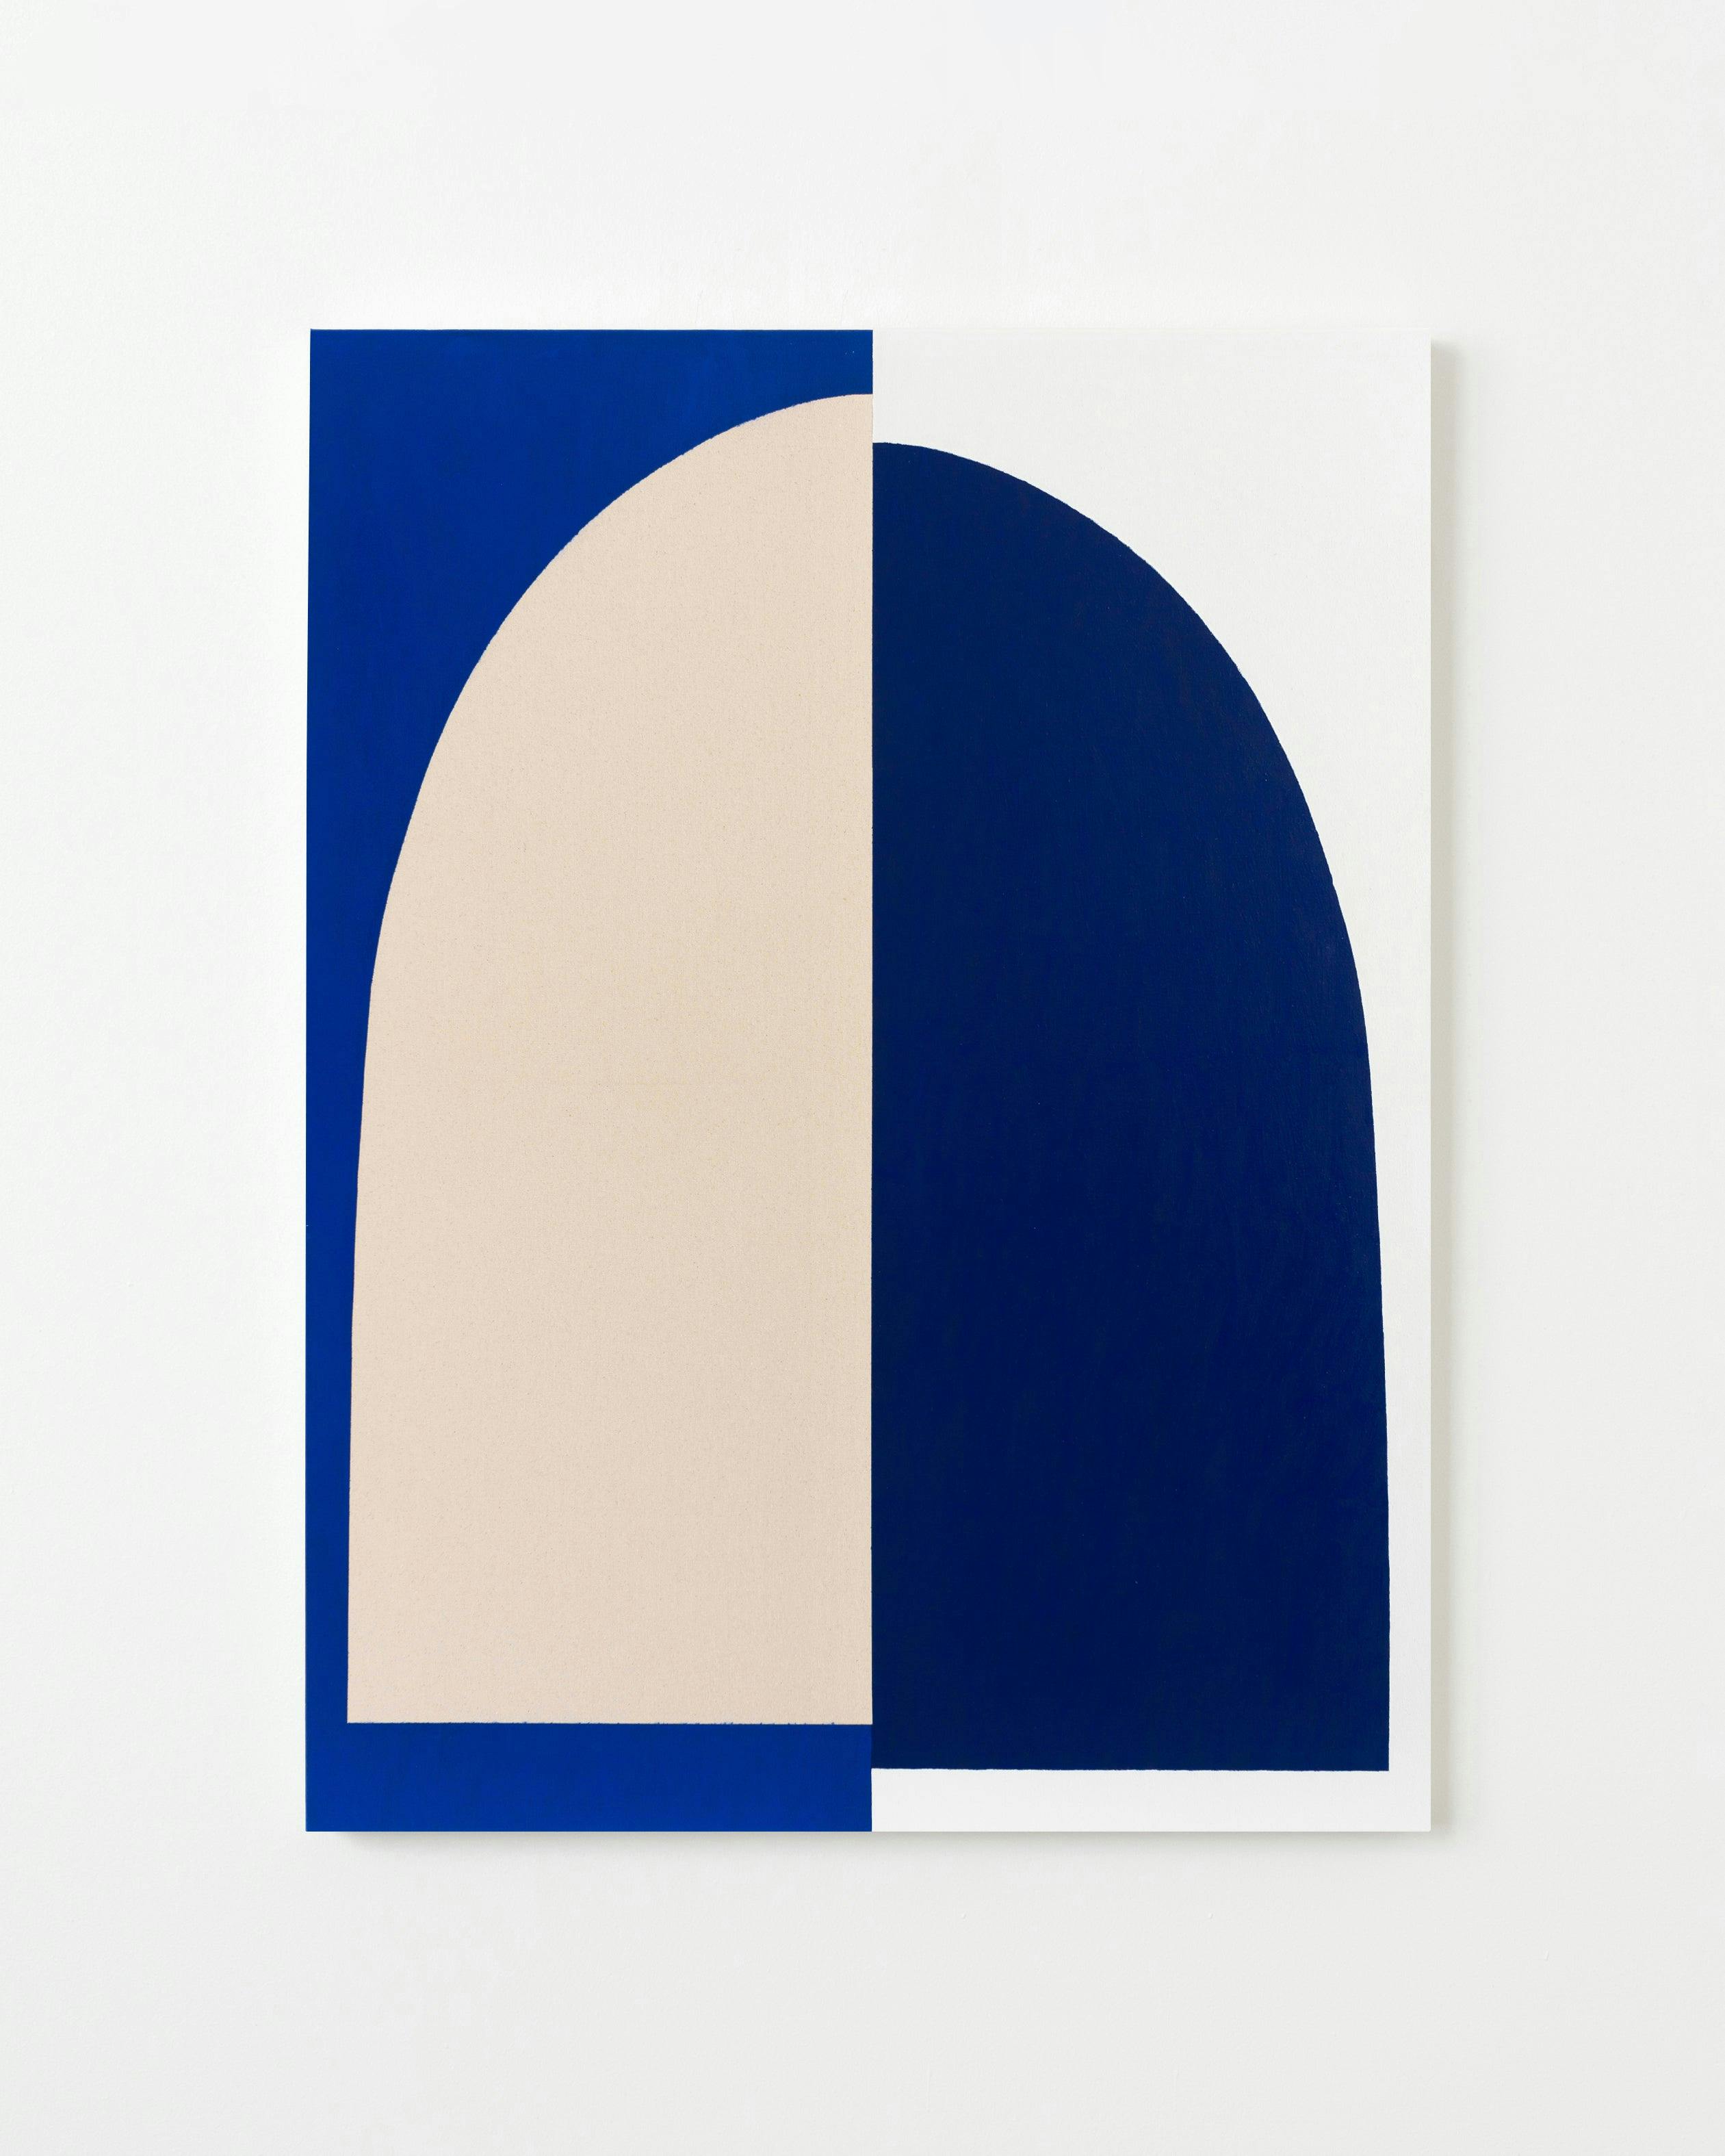 Aschely Vaughan Cone - Double Blue Arch Doublet in White Light - Painting